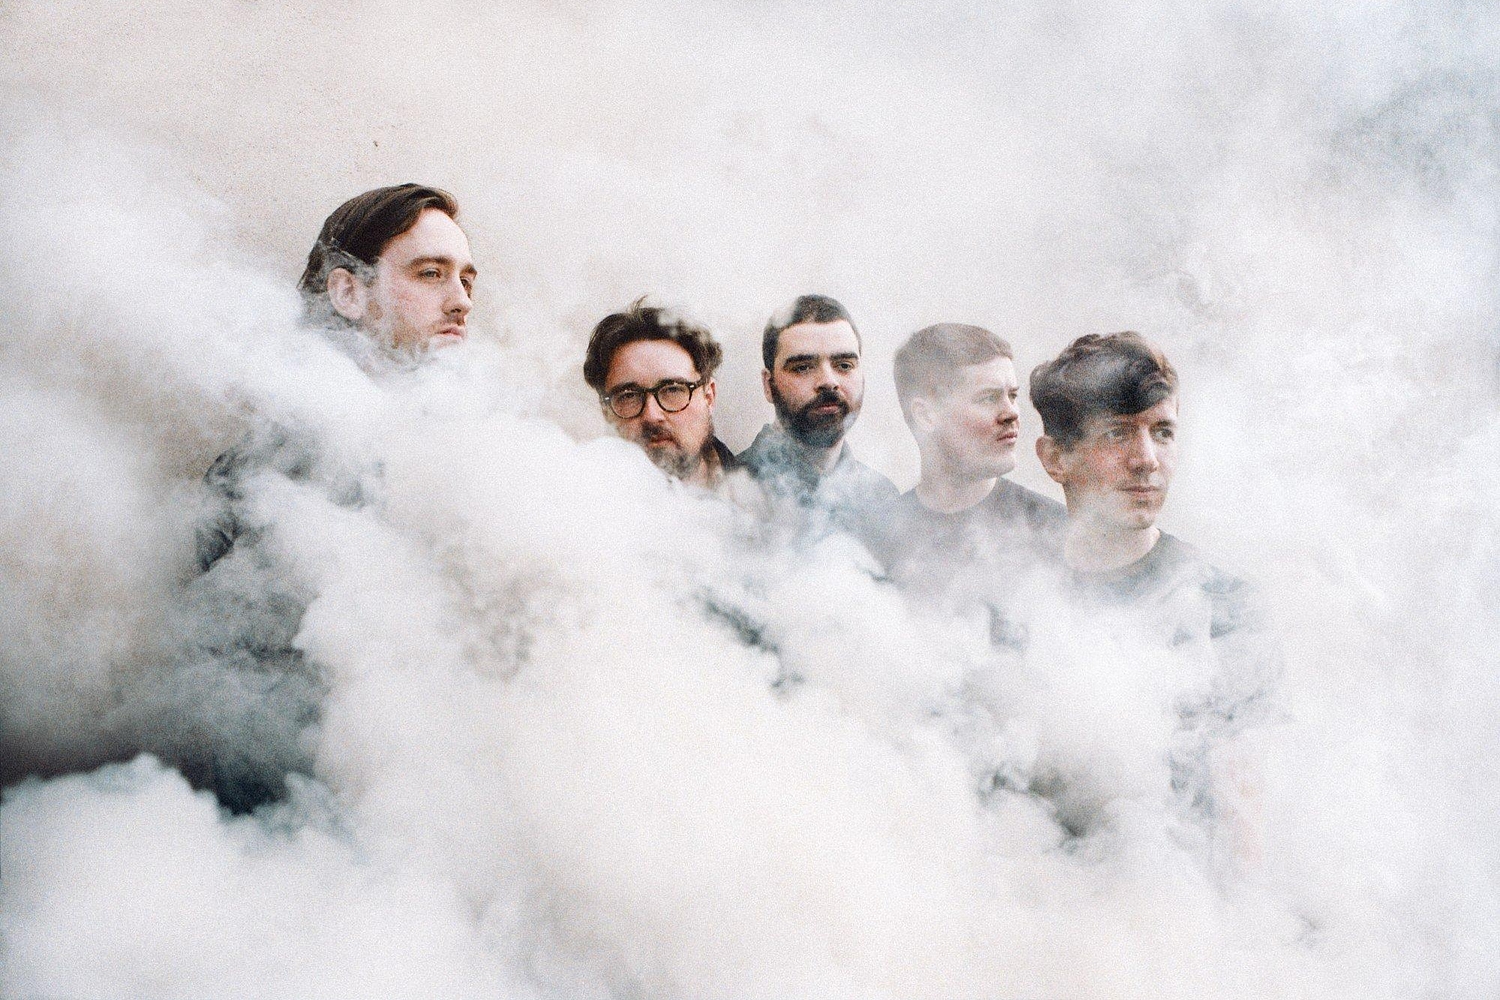 Hookworms share new track ‘Each Time We Pass’, featuring Virginia Wing’s Alice Merida Richards